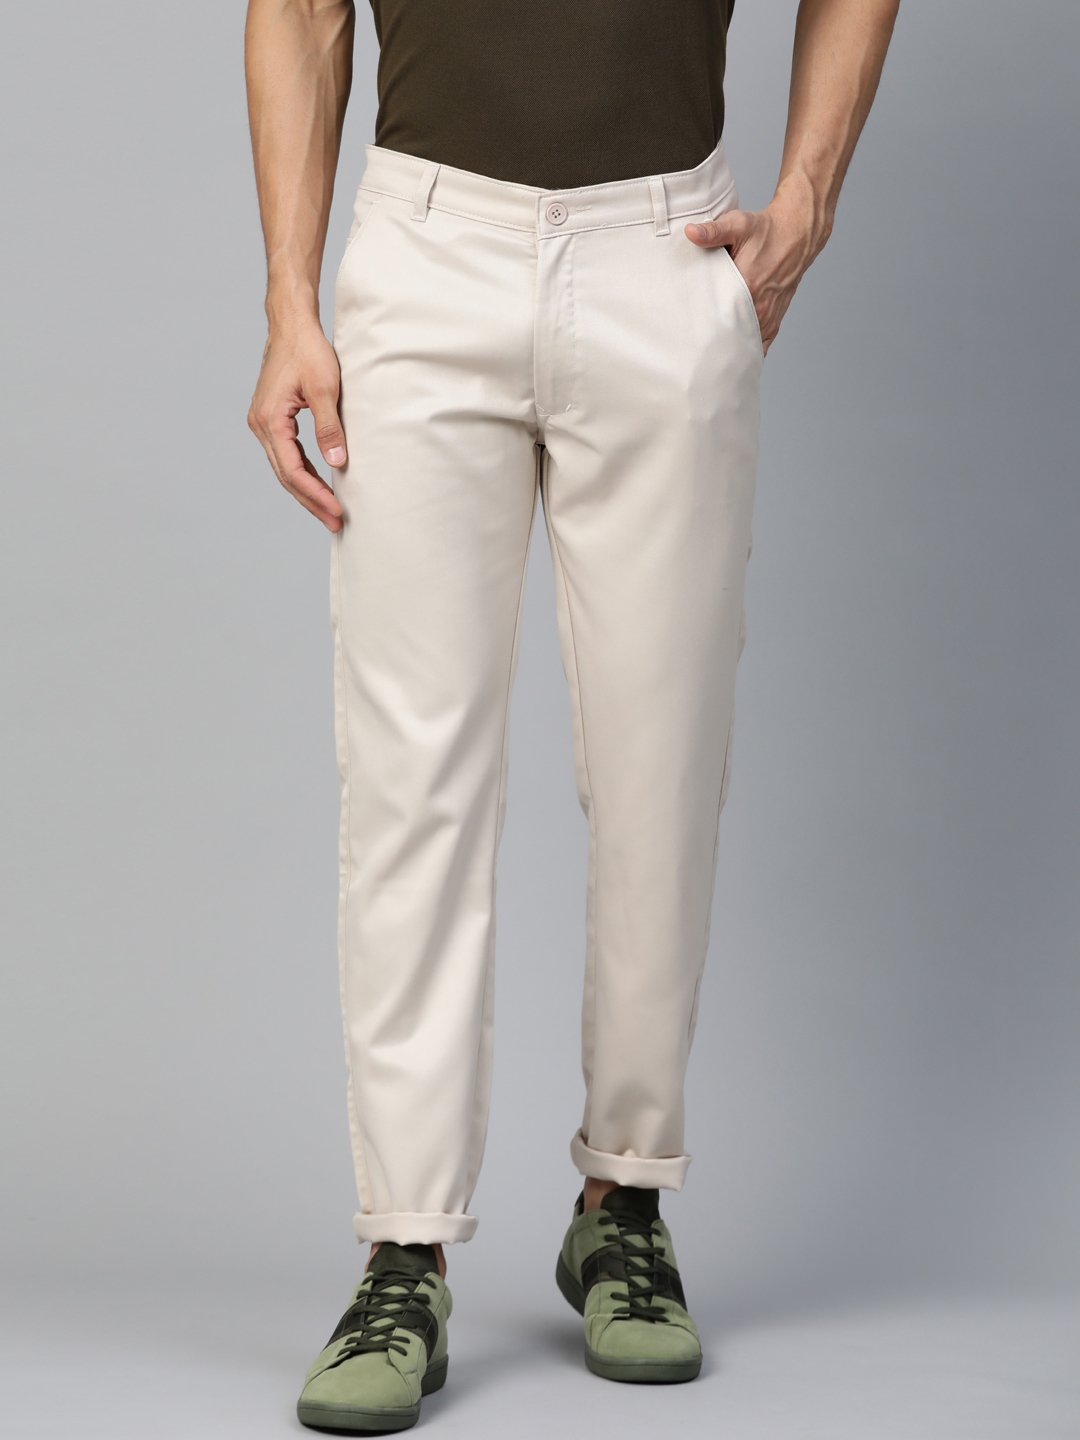 Buy DENNISON Men Cream Coloured Smart Tapered Fit Solid Cropped Chinos ...